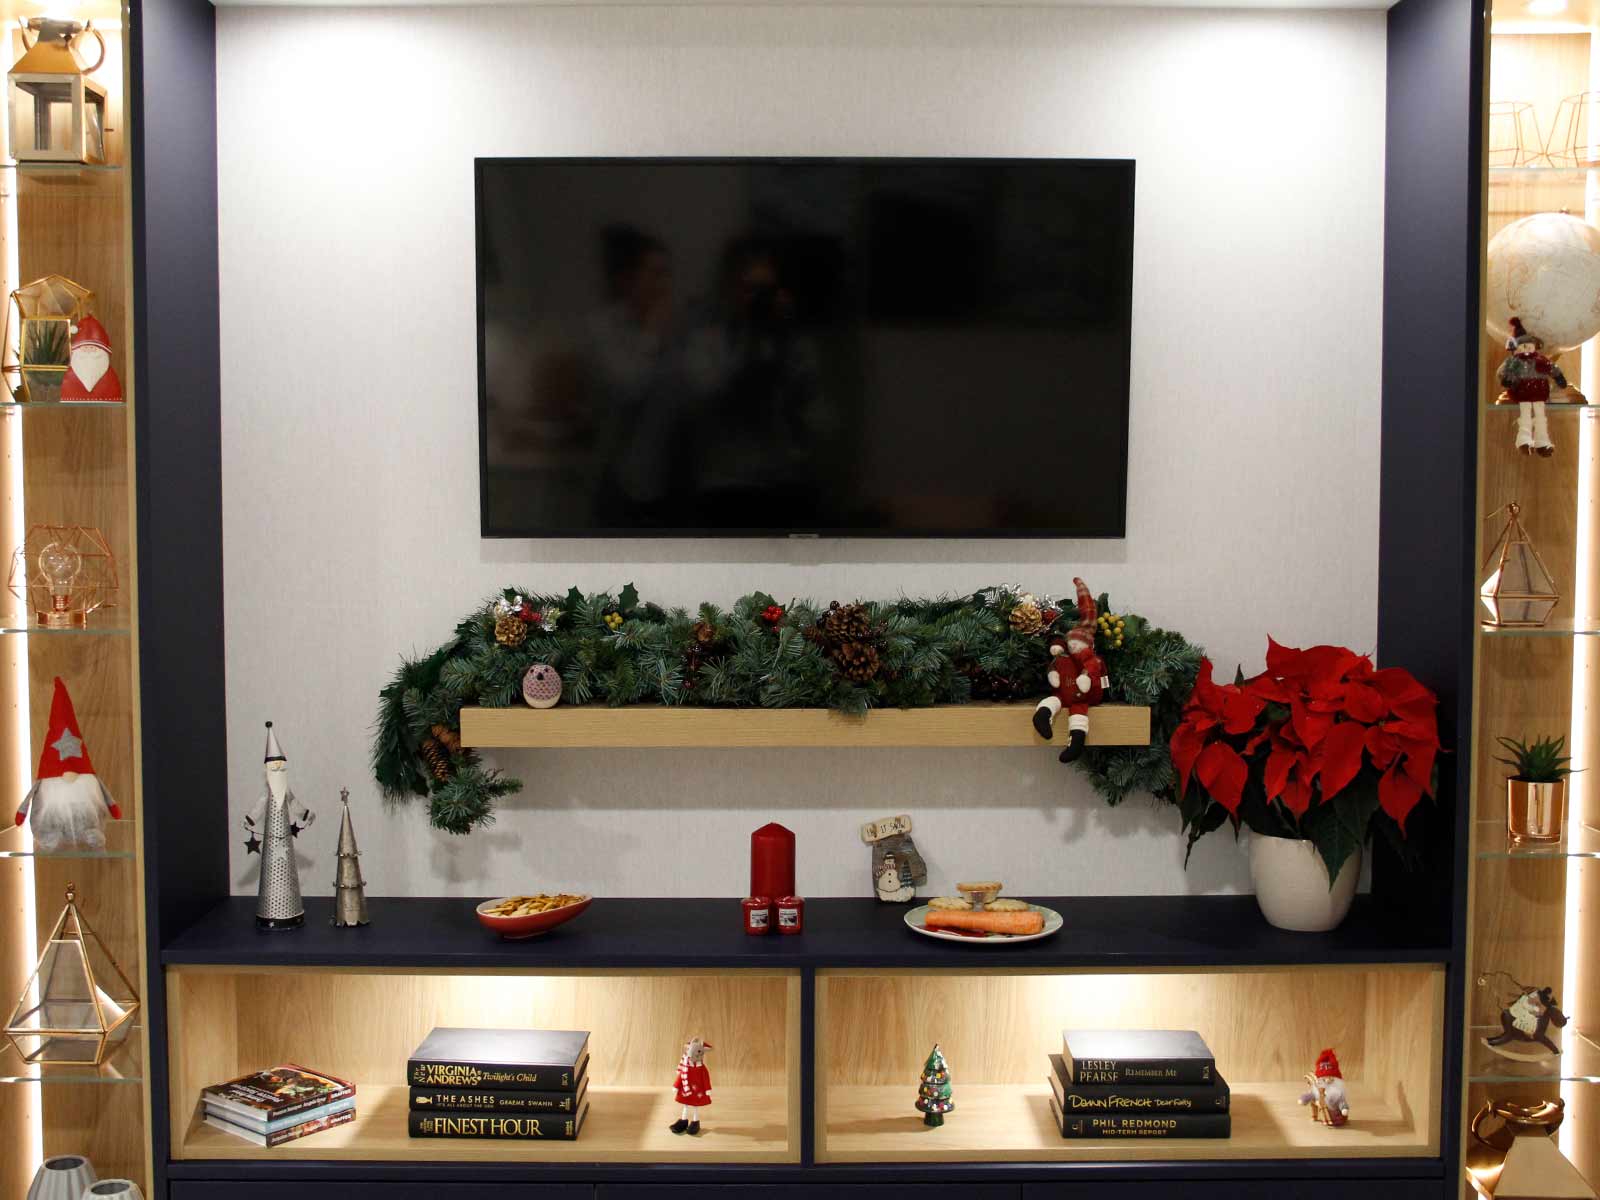 A media wall with cupboards, an oak shelf, a TV and Christmas decorations